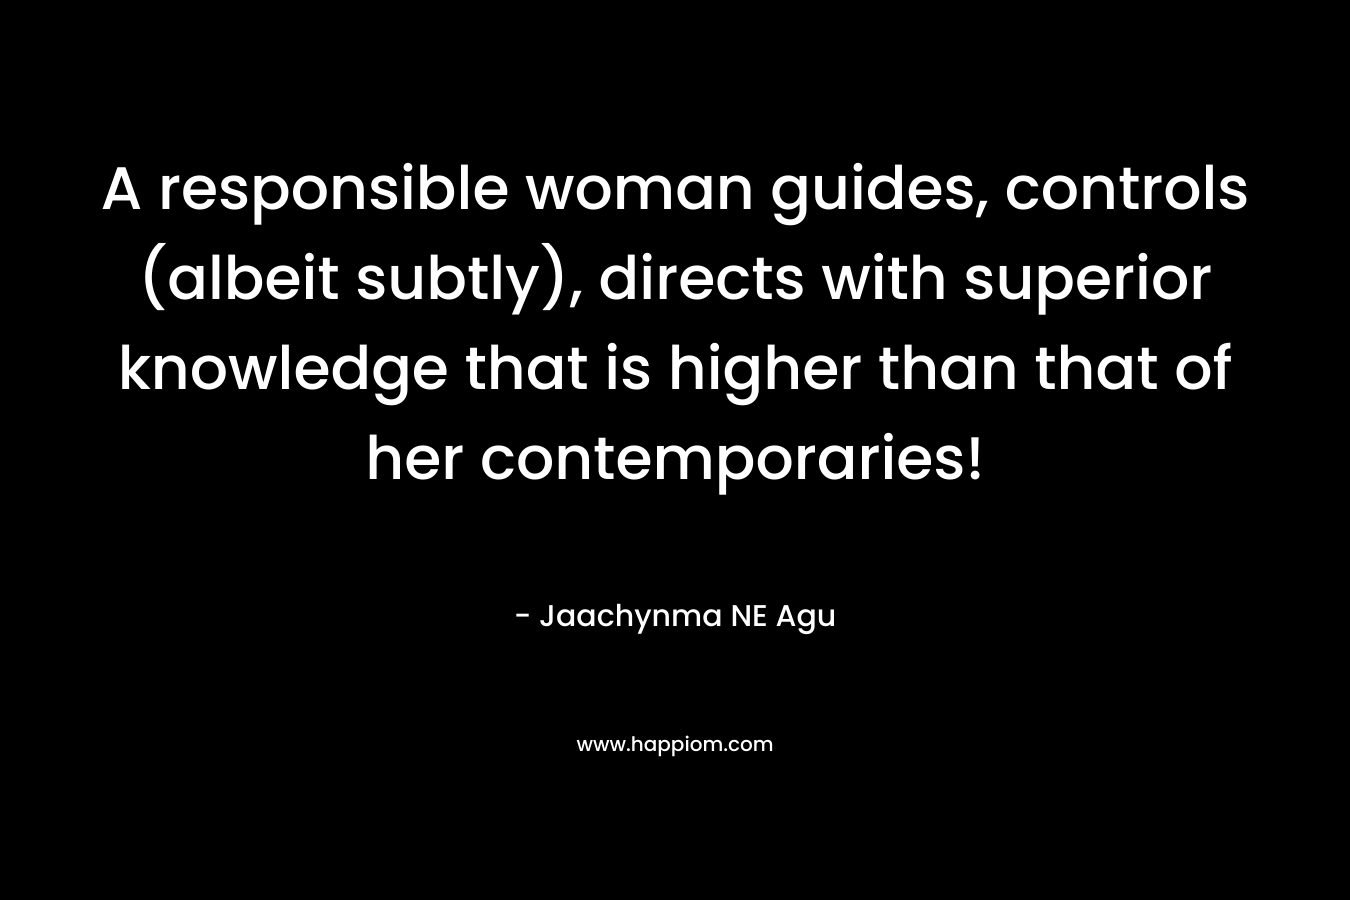 A responsible woman guides, controls (albeit subtly), directs with superior knowledge that is higher than that of her contemporaries!